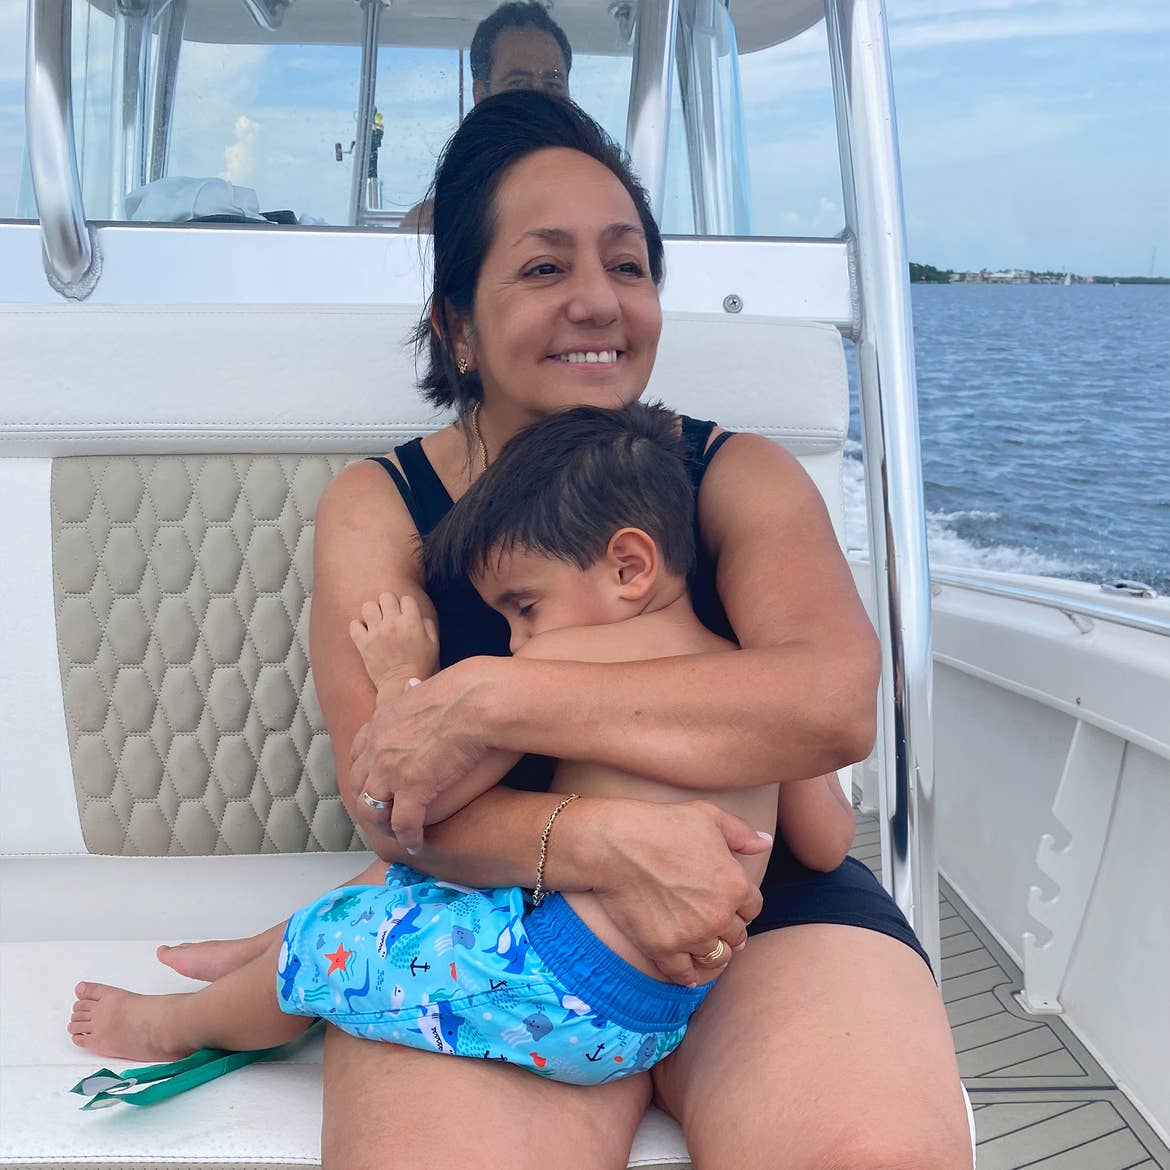 A woman holds a sleeping toddler while a man drives a boat that they are seated on.